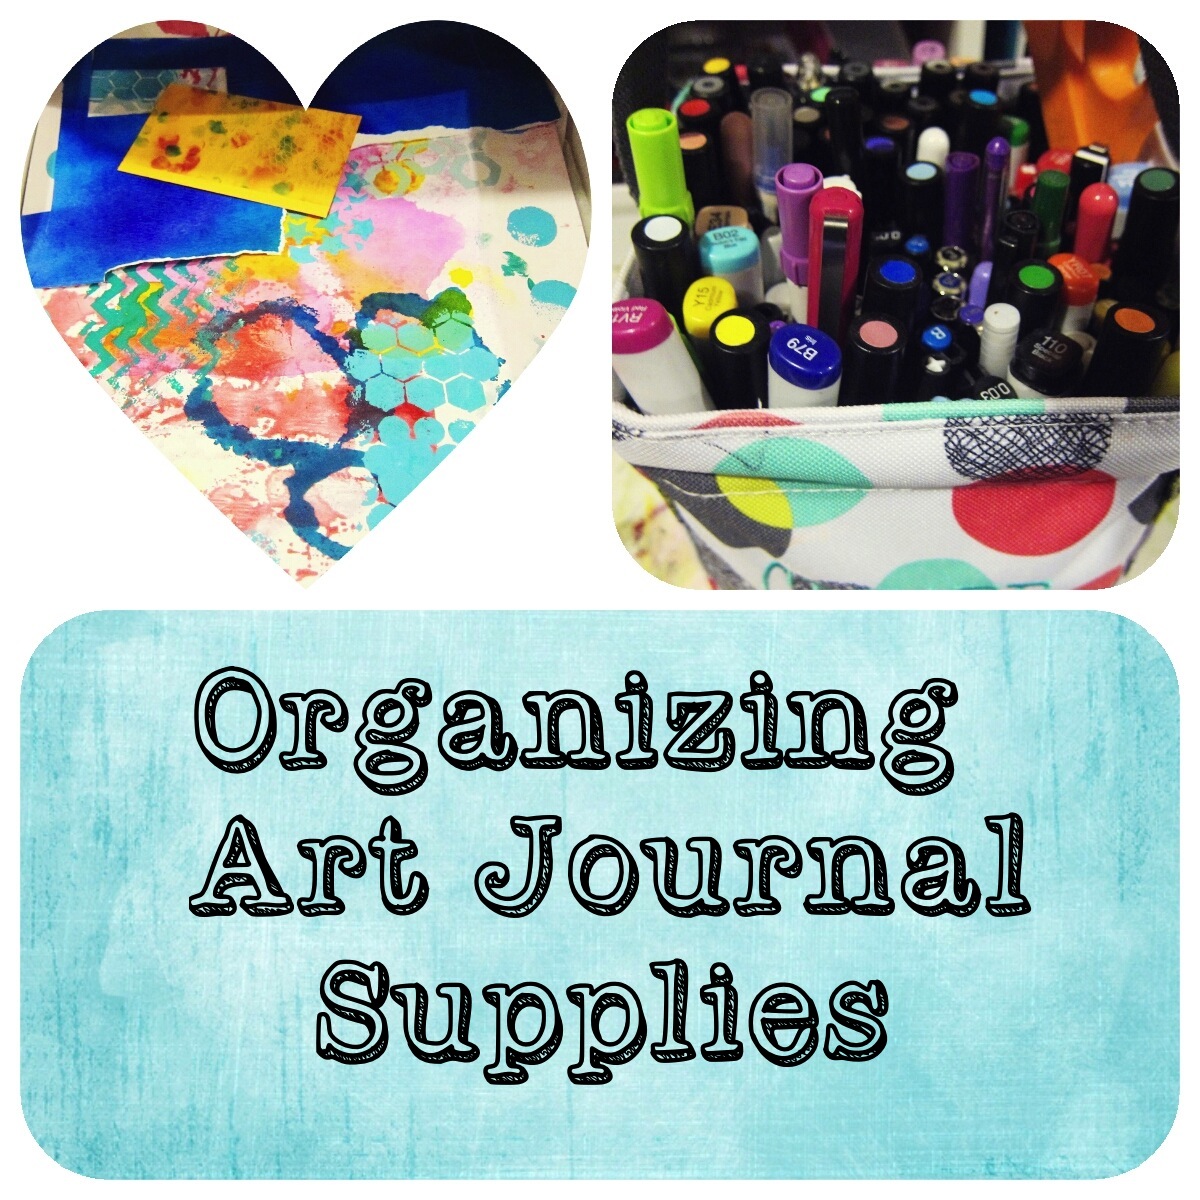 Get started with Art Journaling 2: What art supplies do I need